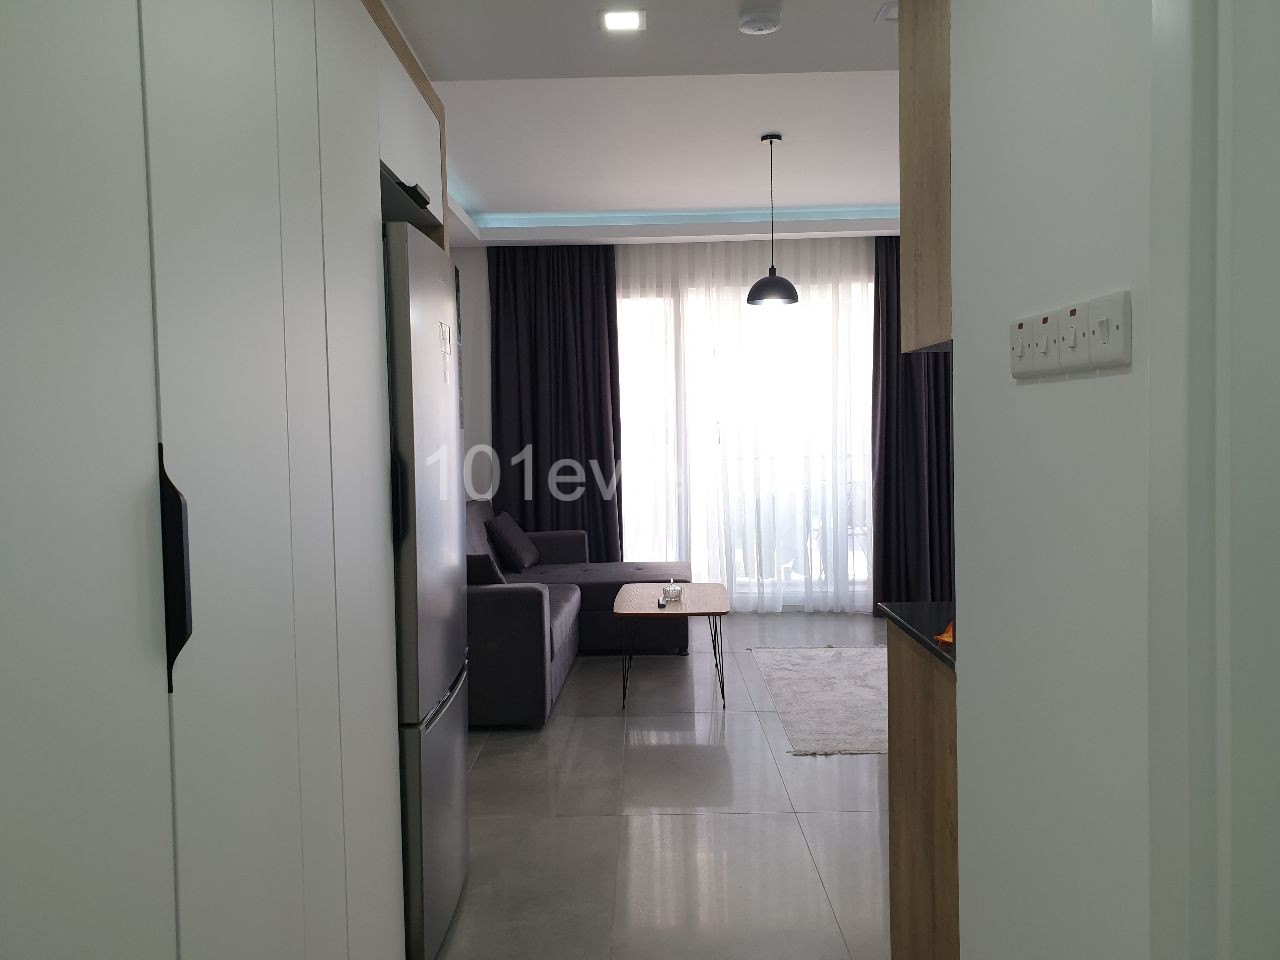 Luxury furnished studio apartment for rent Trass parkts ** 